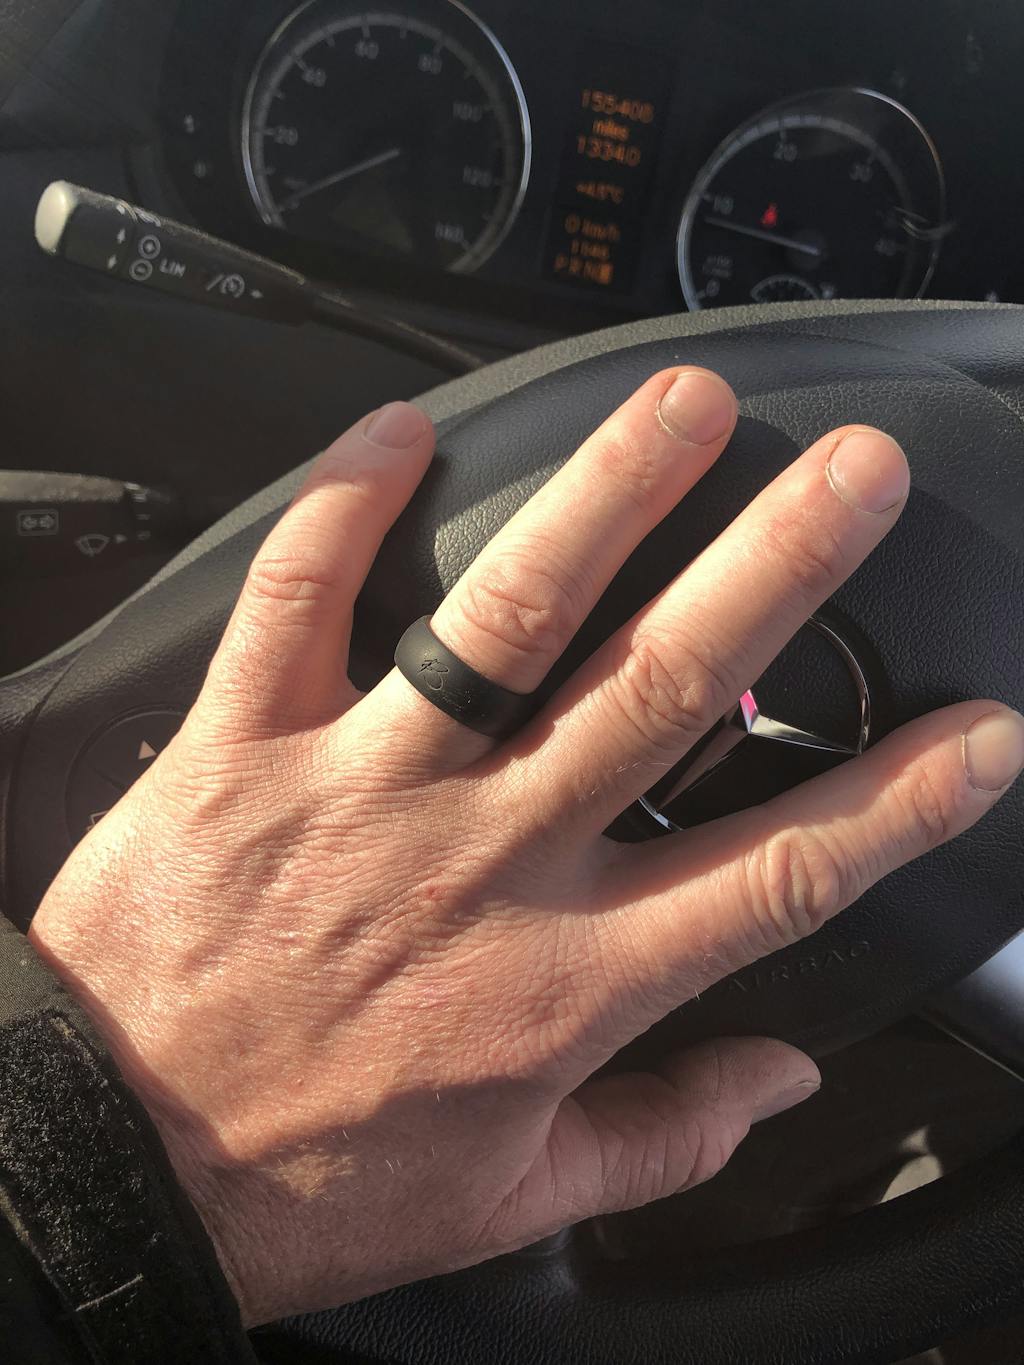 "Very happy with my ring and the service 10/10. I’m a carpenter and often worry about getting my metal ring caught on things. No need to worry now I have my silicon ring. Excellent sizing and very comfortable"